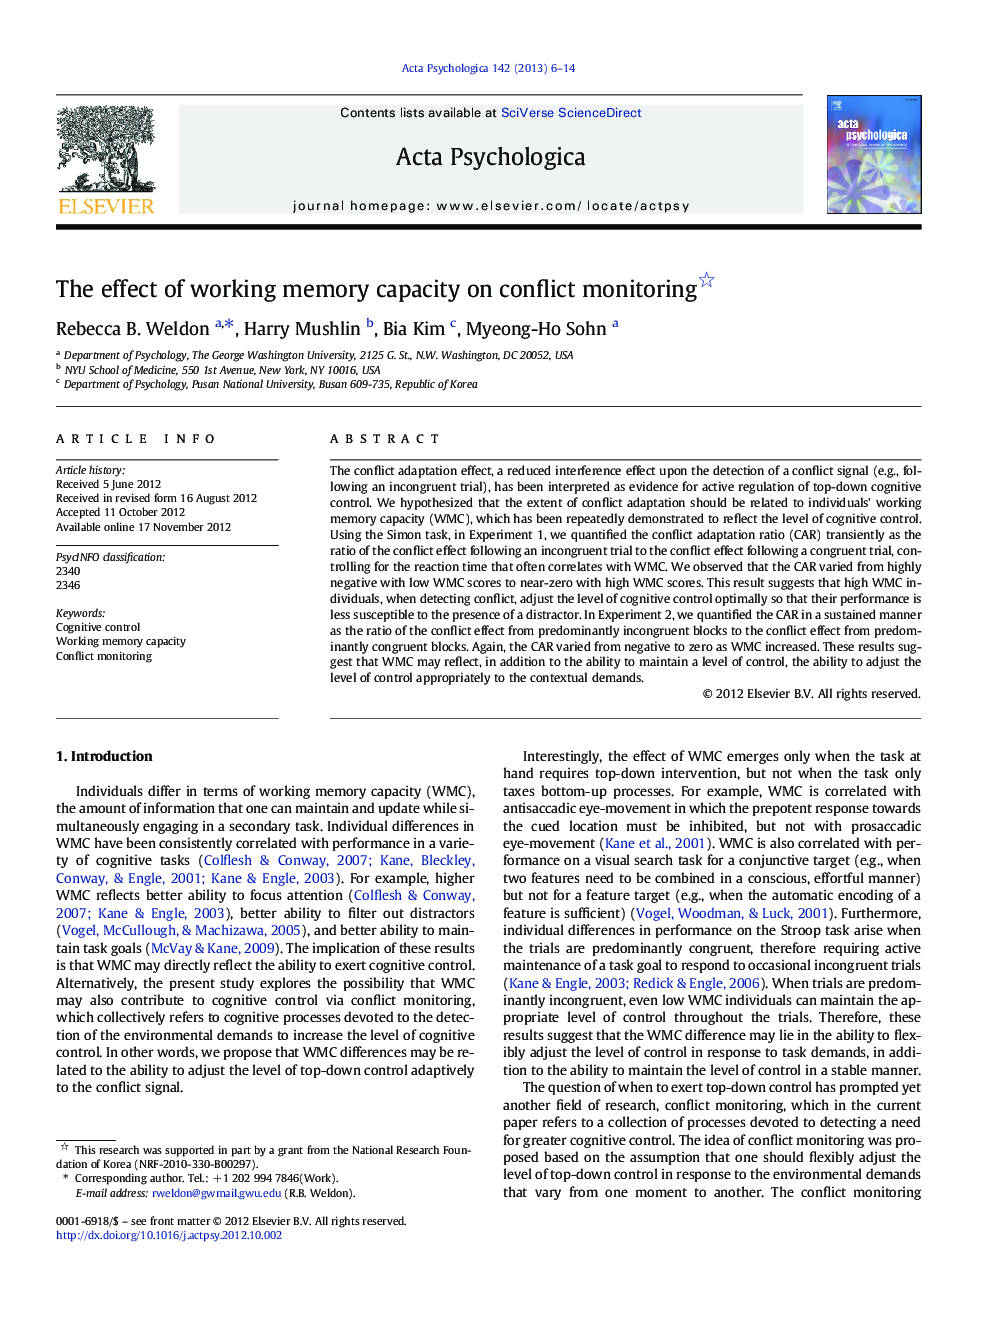 The effect of working memory capacity on conflict monitoring 